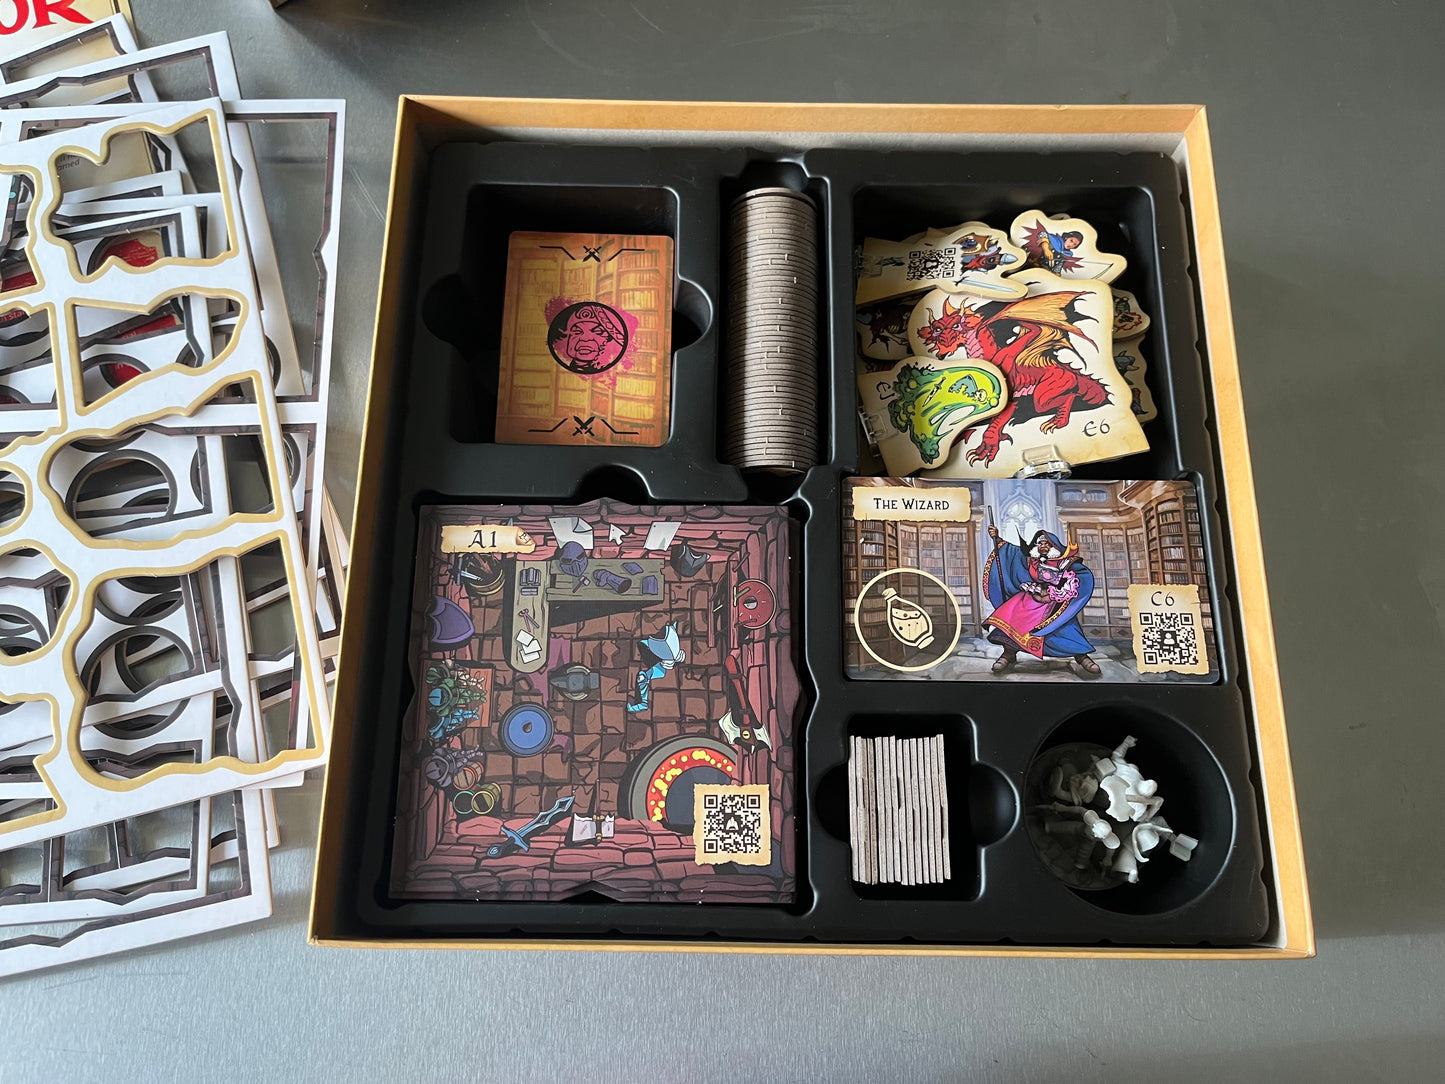 Taelmoor: The Scan and Play Dungeon Crawler Board Game